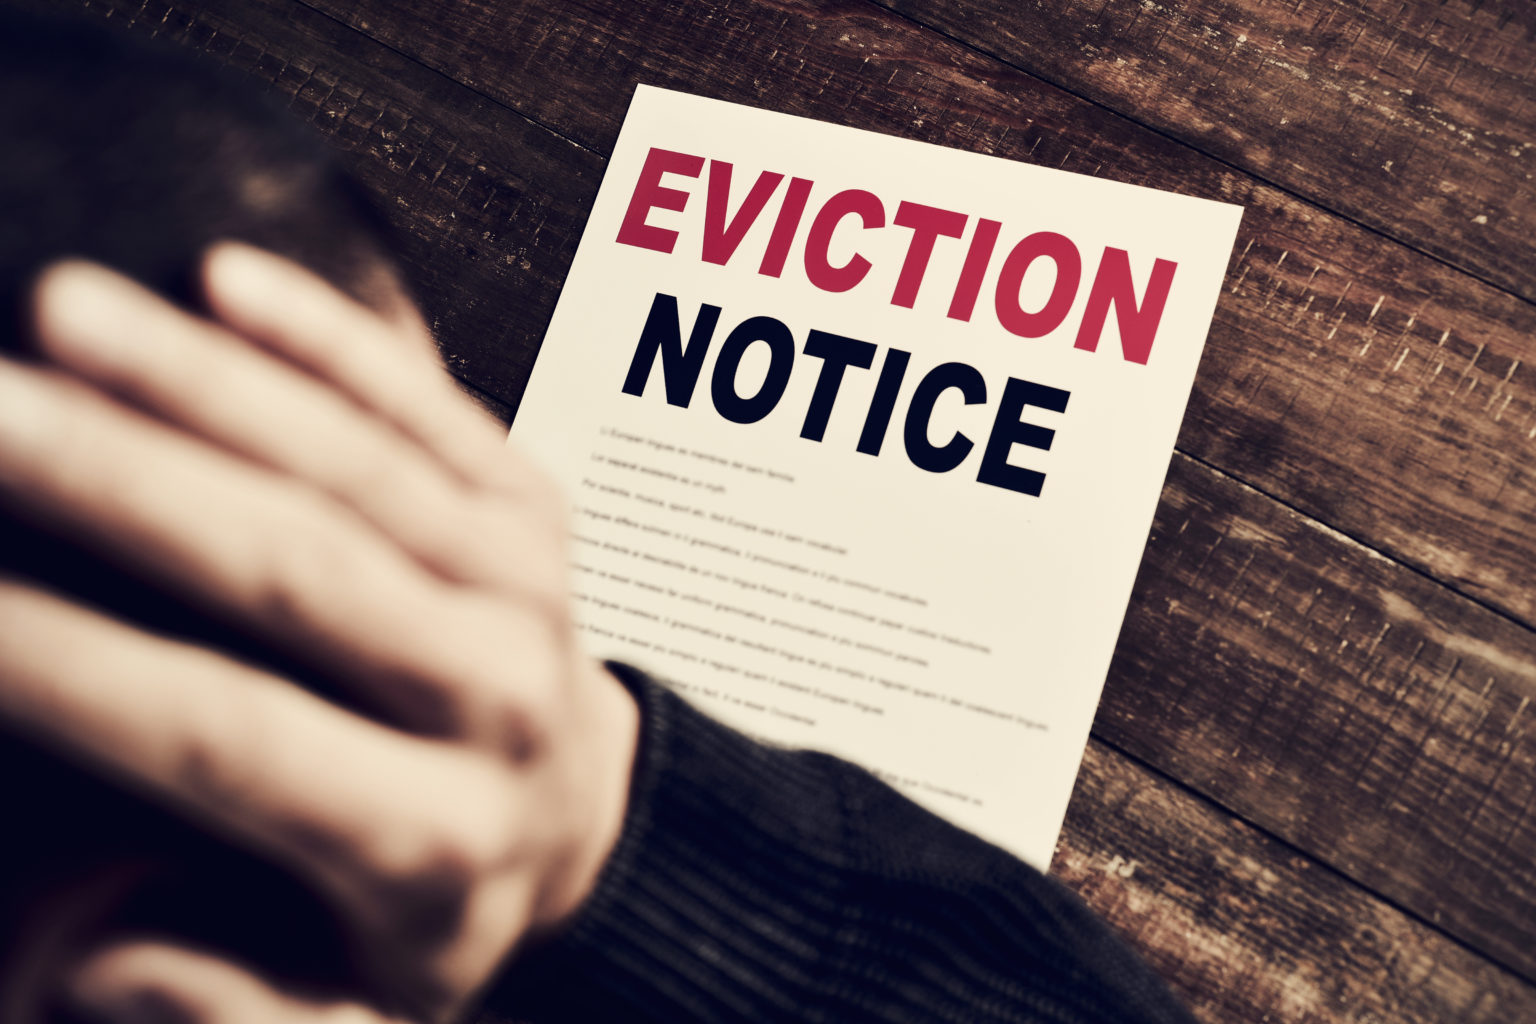 Eviction Law Evicting Process RequestLegalHelp com